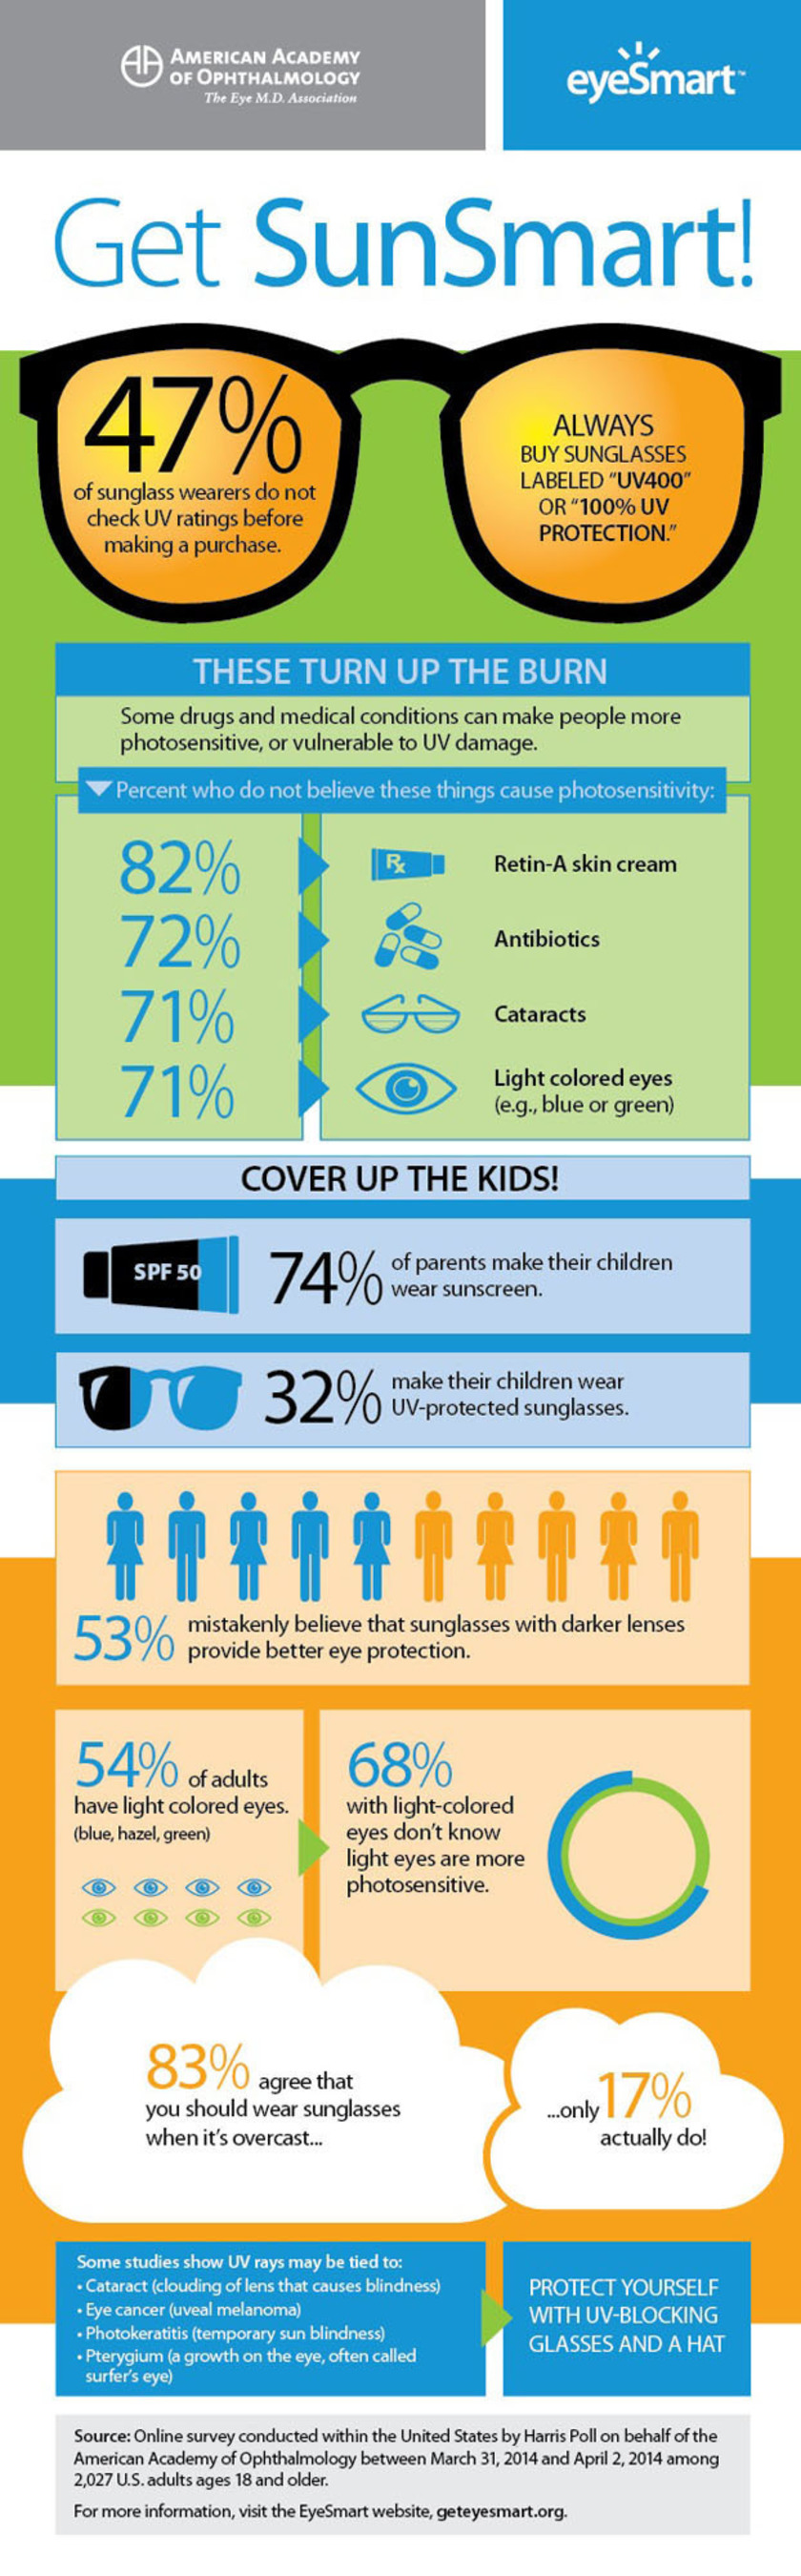 Get SunSmart! An infographic from the American Academy of Ophthalmology. (PRNewsFoto/American Academy Ophthalmology)